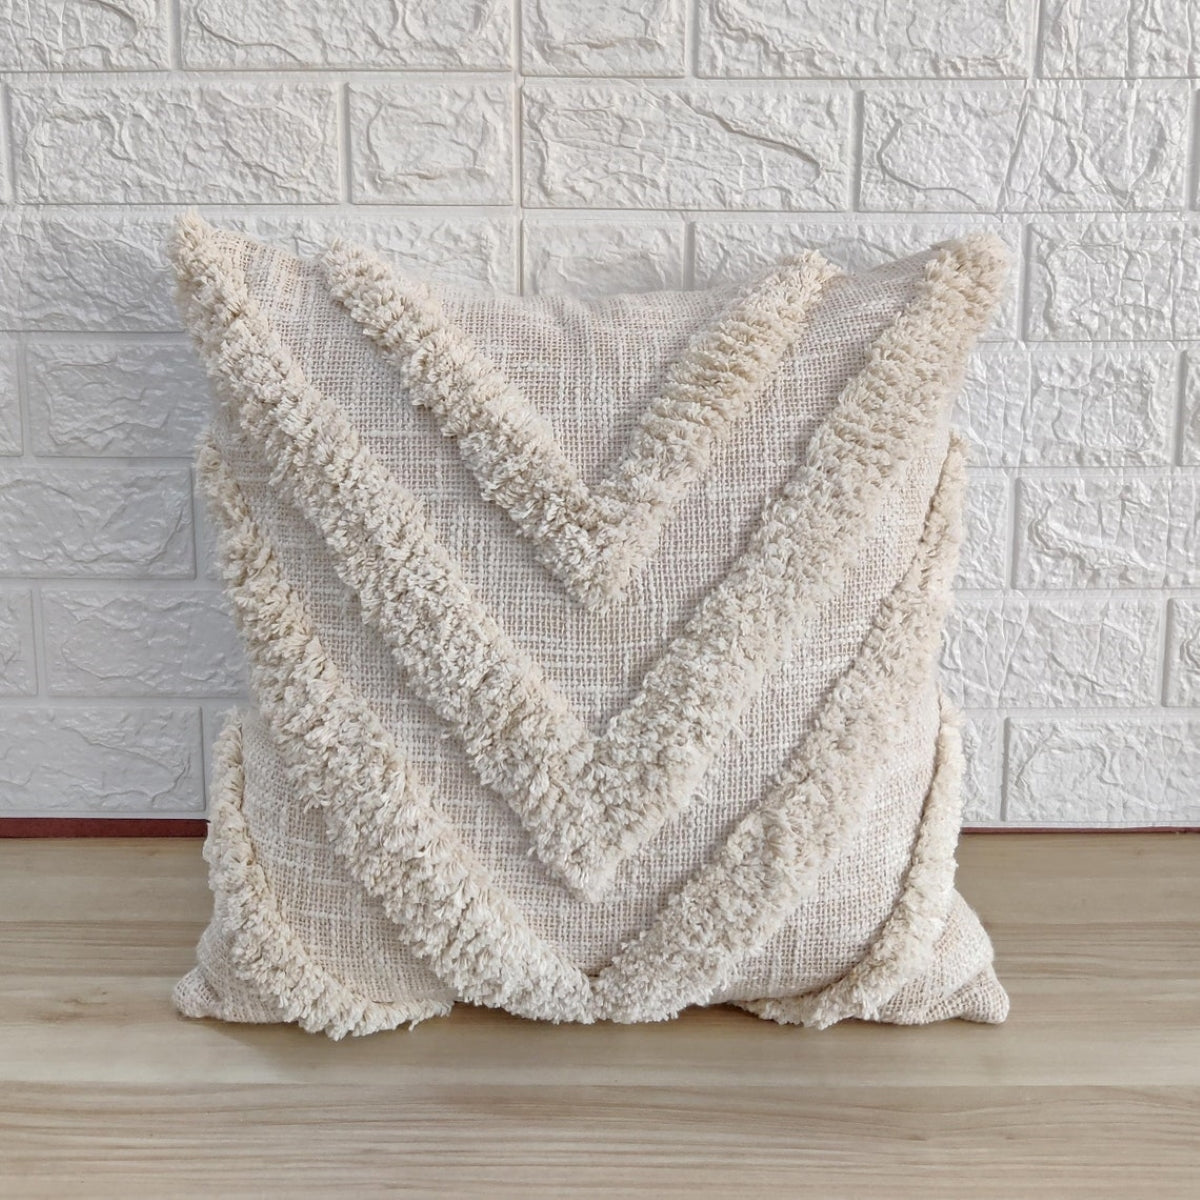 Ivory Handtufted Textured Cotton Cushion Cover